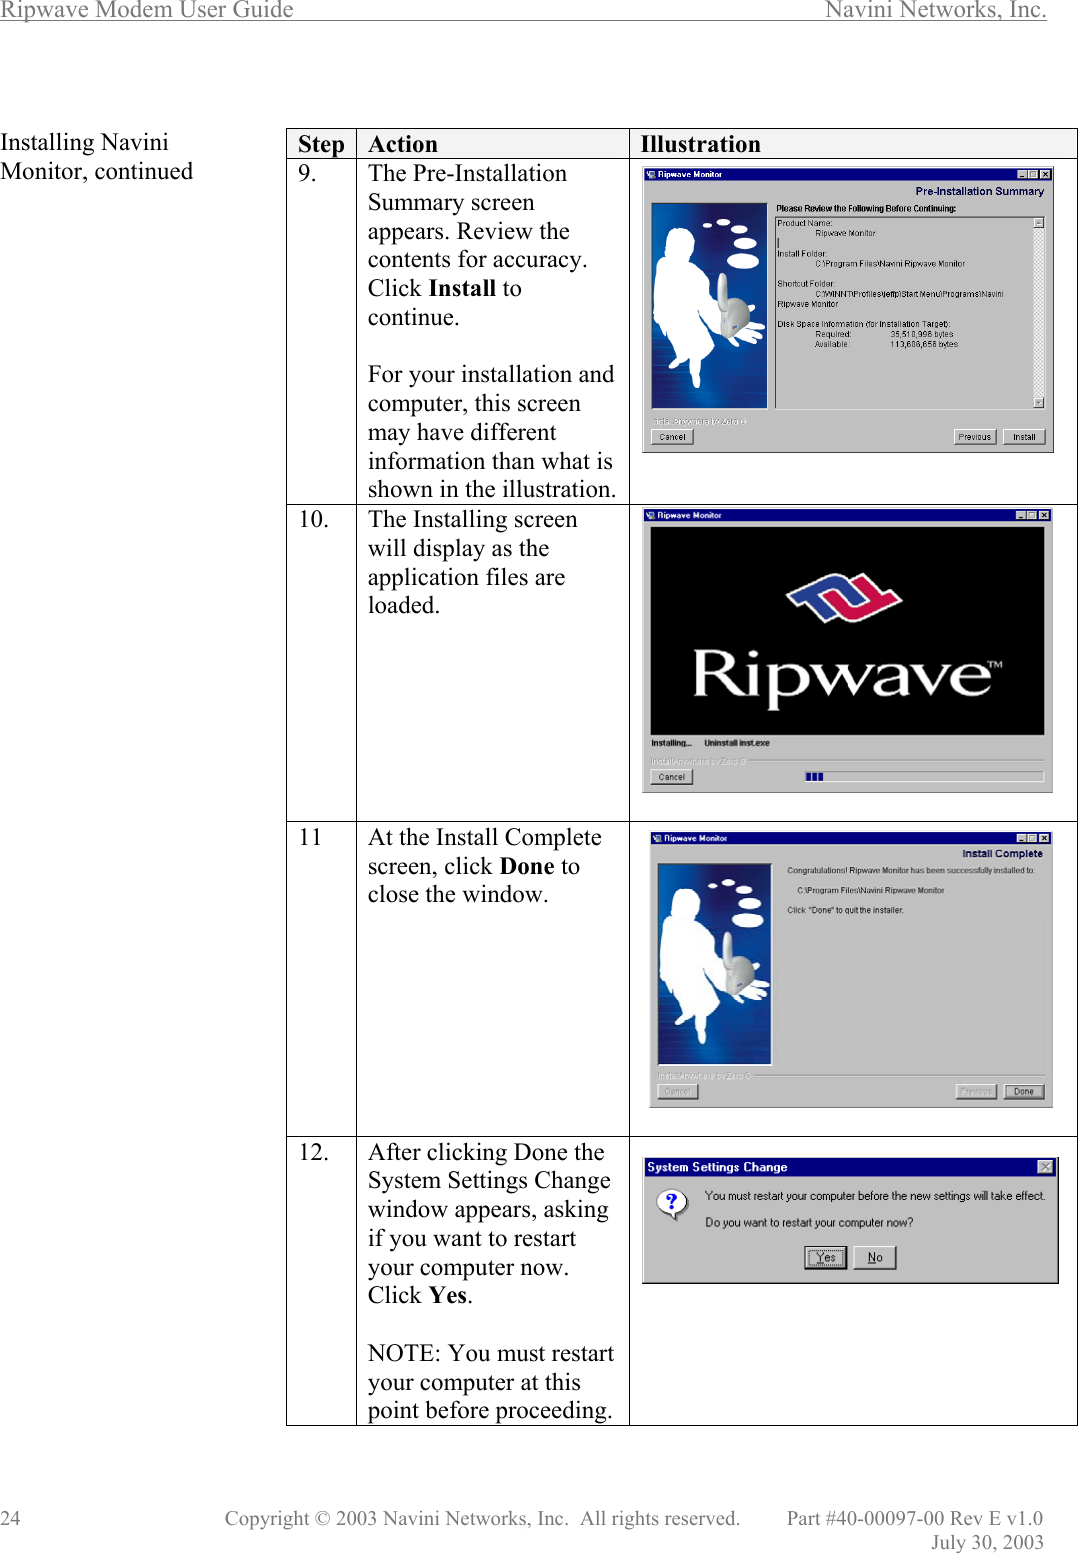 Ripwave Modem User Guide        Navini Networks, Inc. 24      Copyright © 2003 Navini Networks, Inc.  All rights reserved.         Part #40-00097-00 Rev E v1.0                   July 30, 2003  Installing Navini Monitor, continued                                             Step  Action  Illustration 9. The Pre-Installation Summary screen appears. Review the contents for accuracy. Click Install to continue.   For your installation and computer, this screen may have different information than what is shown in the illustration.  10.  The Installing screen will display as the application files are loaded.  11  At the Install Complete screen, click Done to close the window.  12.  After clicking Done the System Settings Change window appears, asking if you want to restart your computer now. Click Yes.  NOTE: You must restart your computer at this point before proceeding.  